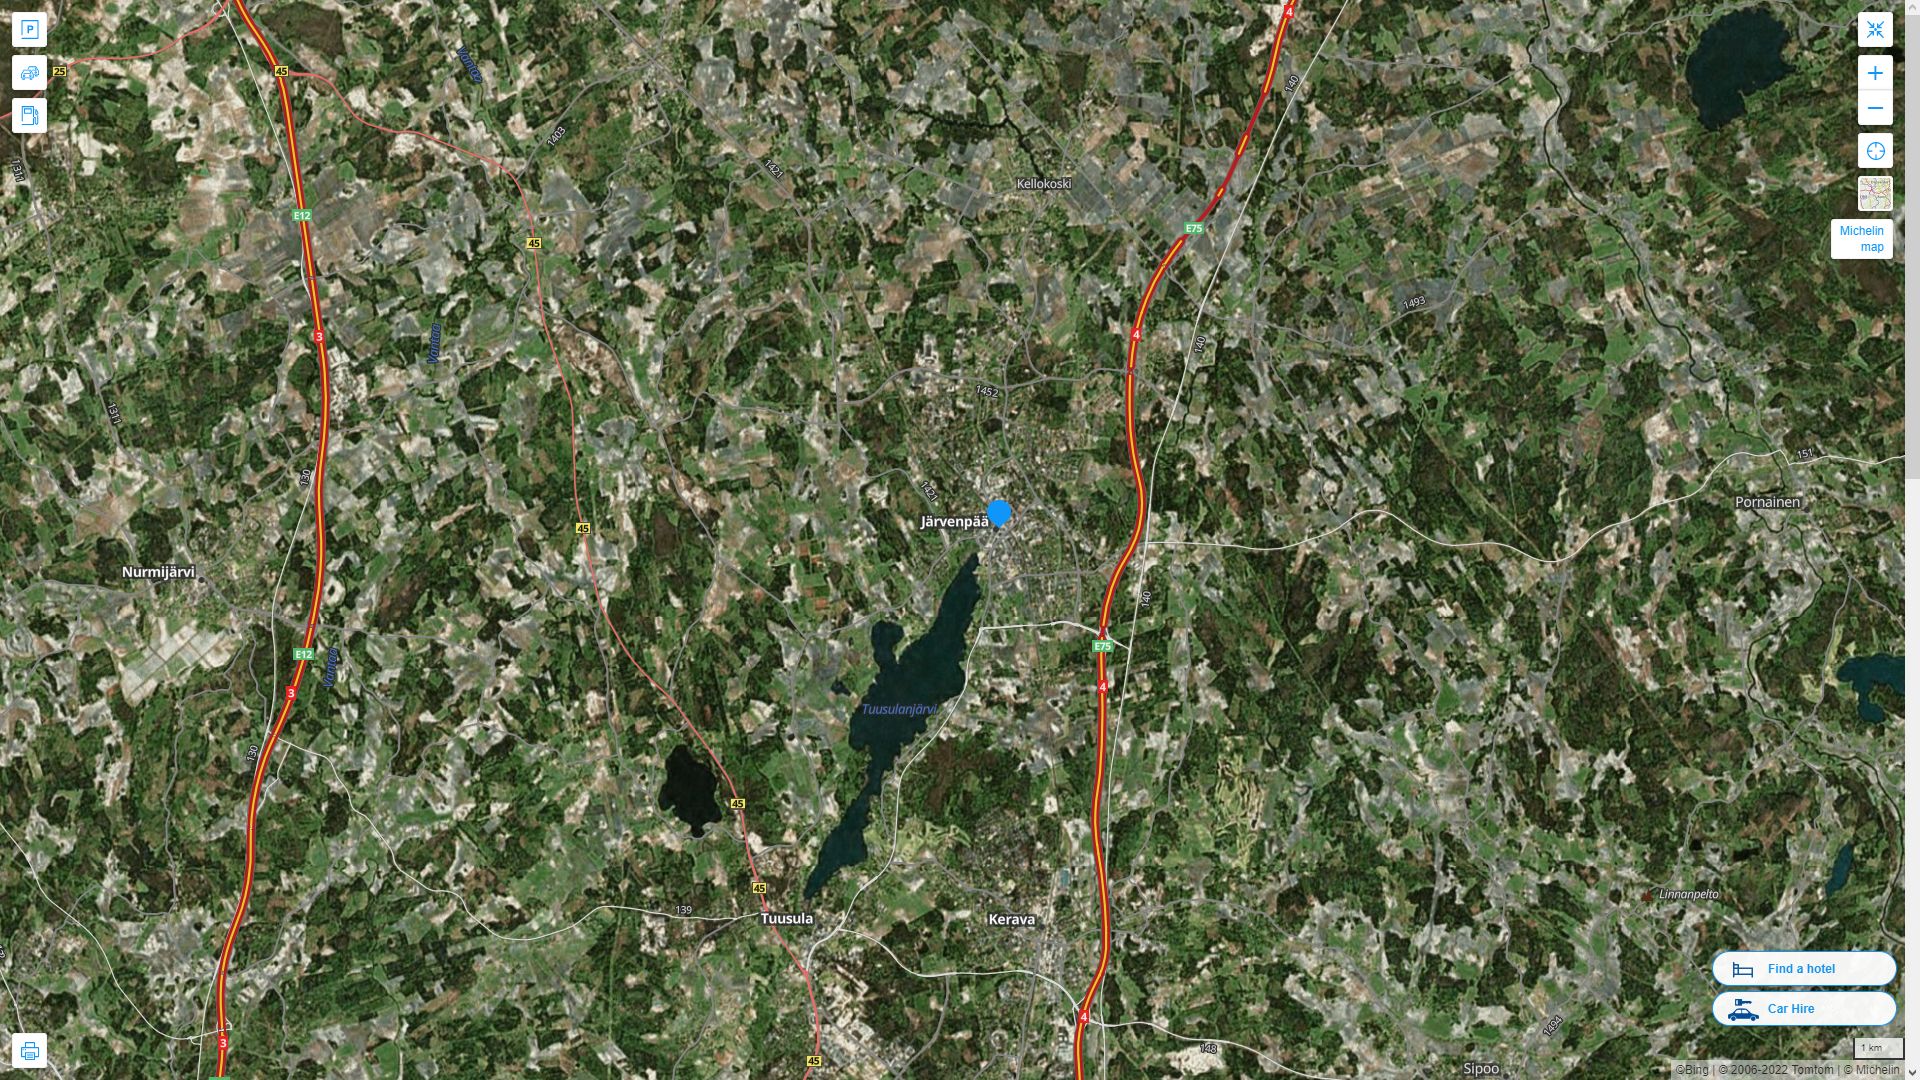 Jarvenpaa Highway and Road Map with Satellite View